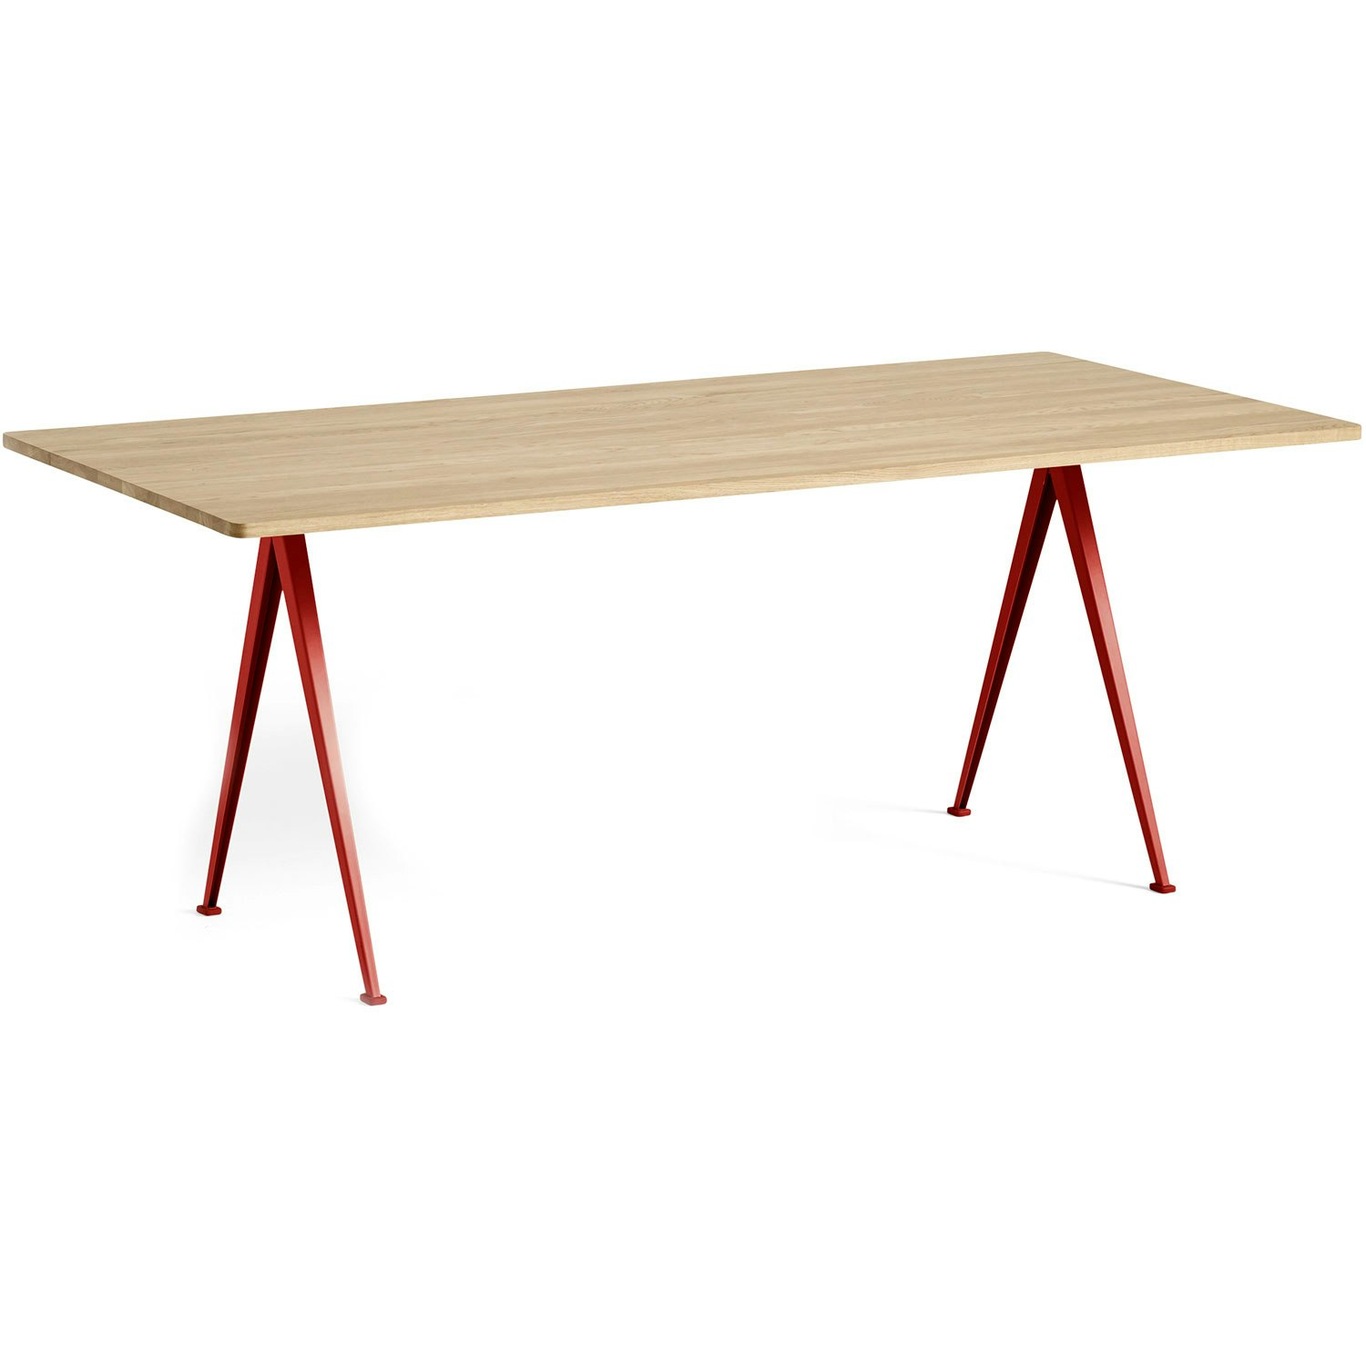 Pyramid 02 Dining Table 85x190 cm, Tomato Red / Matte Lacquered Oak